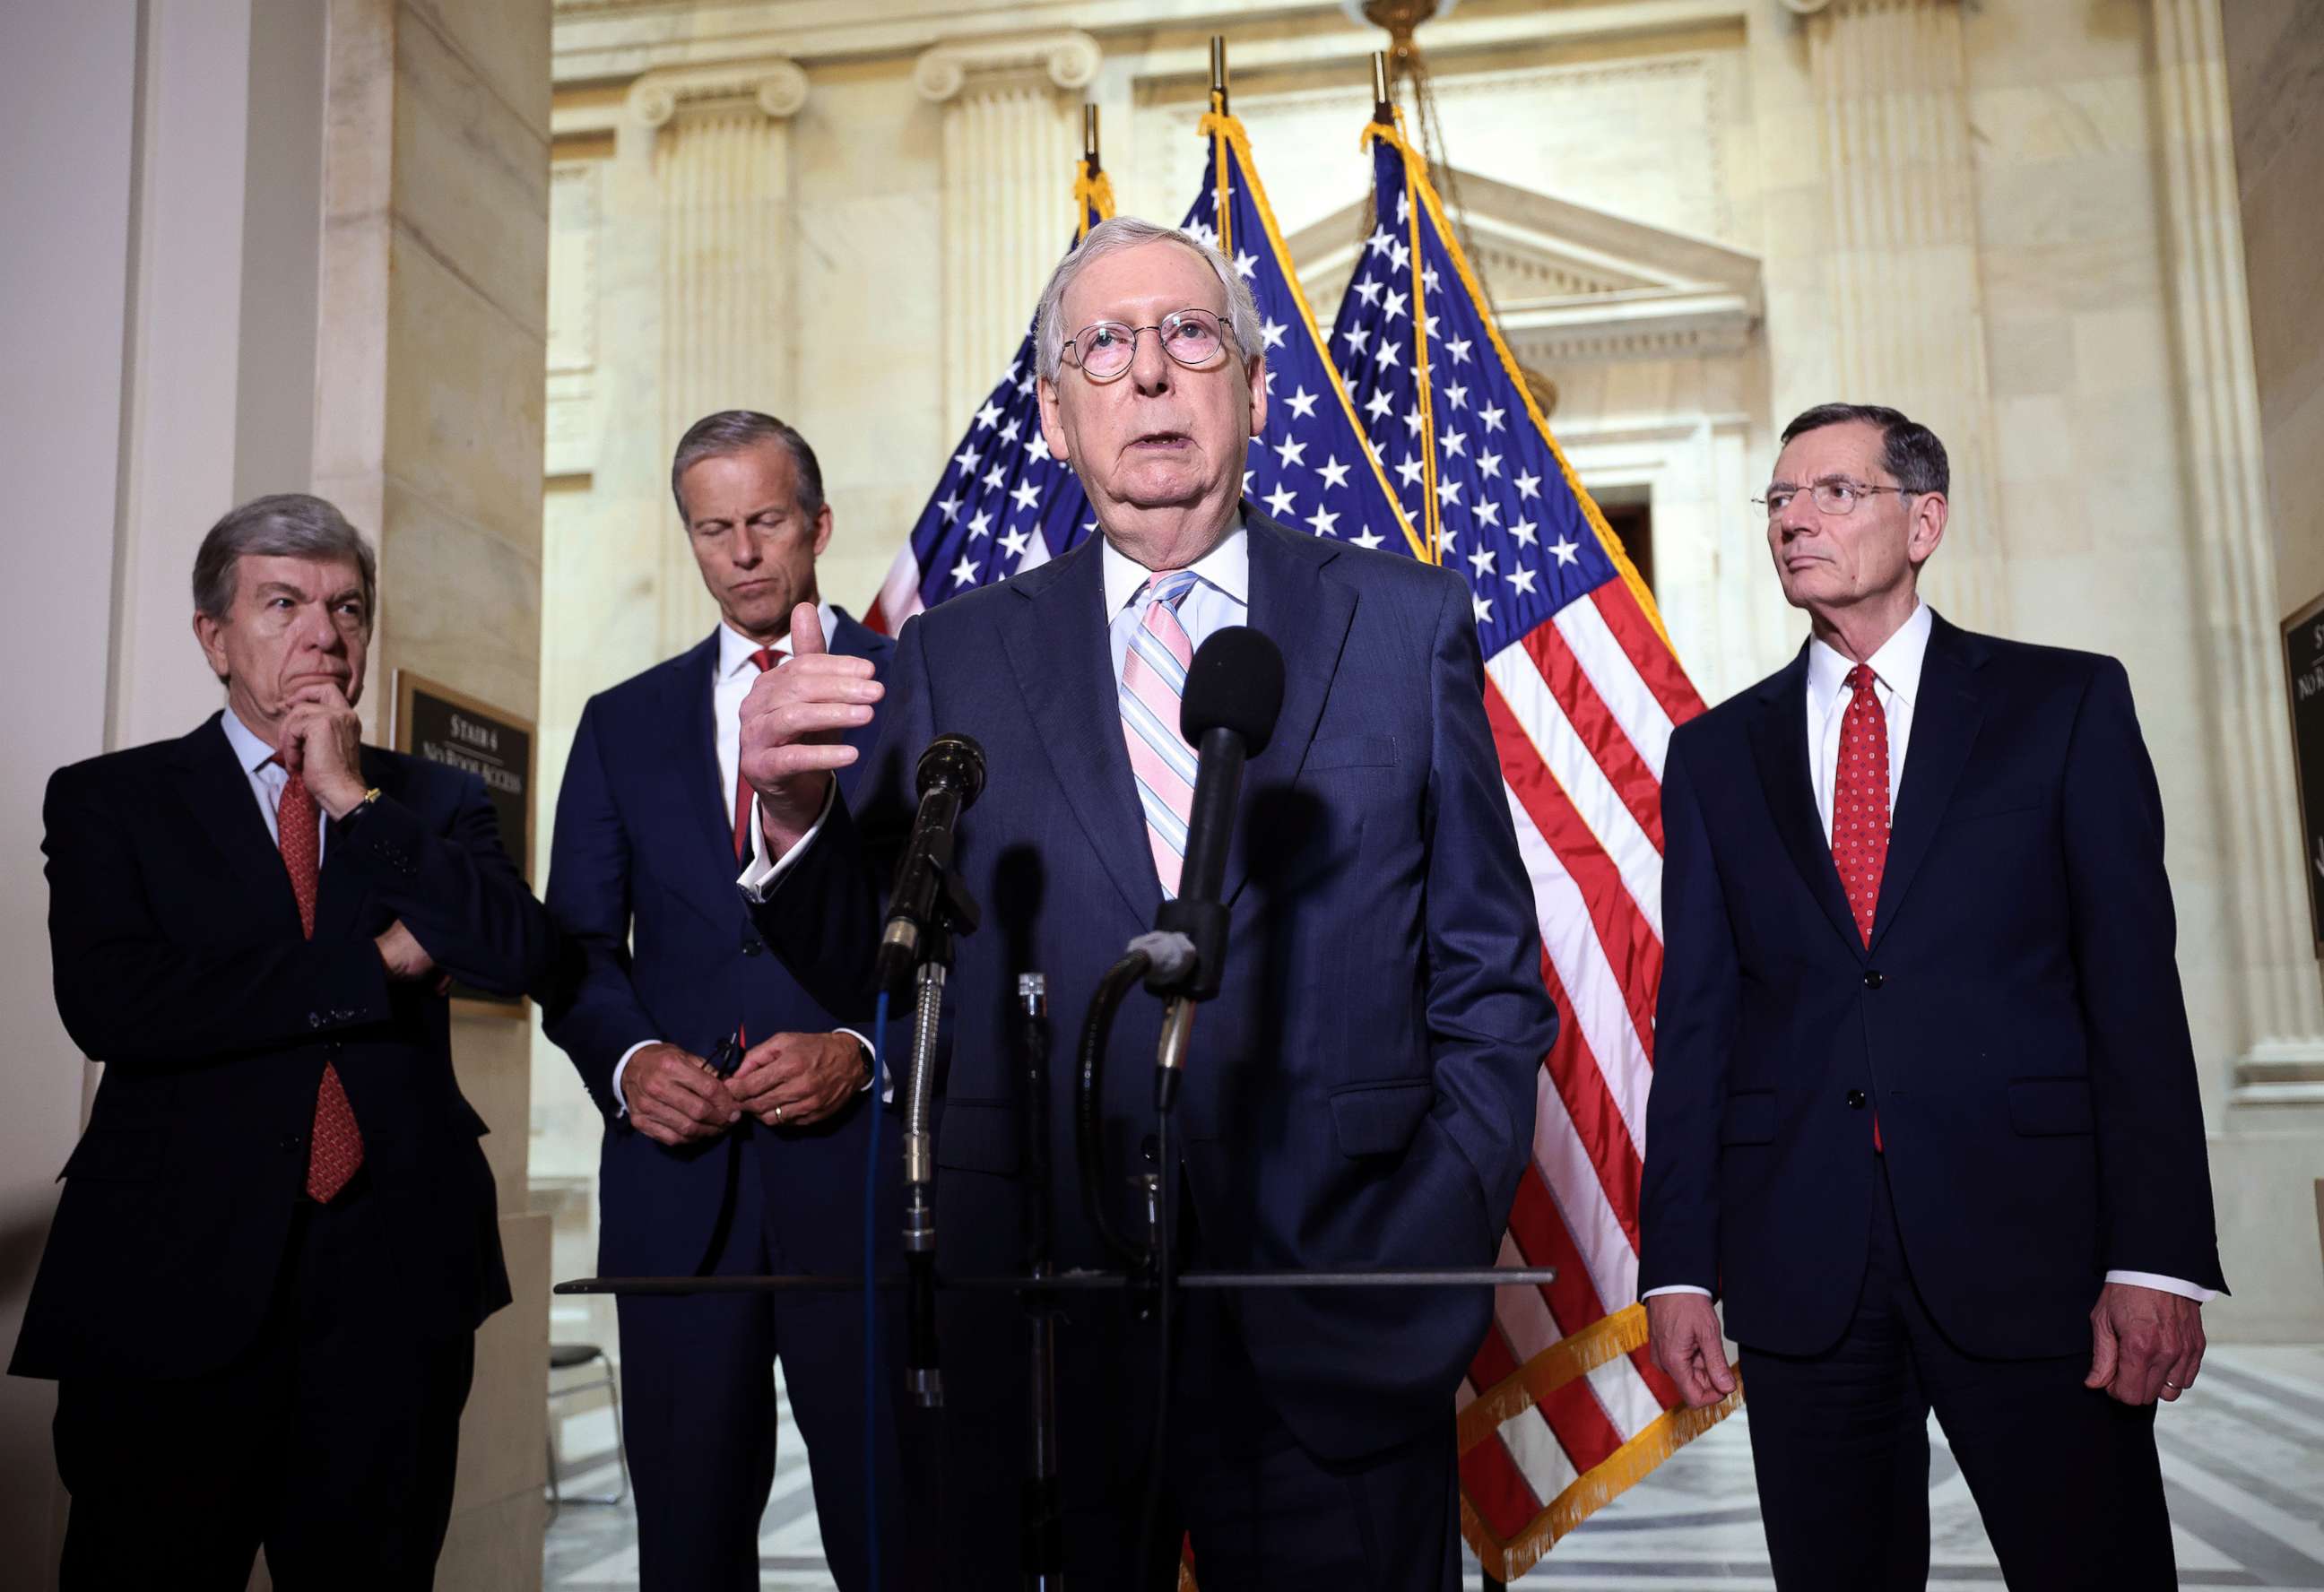 PHOTO: Senate Majority Leader Mitch McConnell joined by fellow Republican leadership, speaks to reporters following the weekly Republican policy luncheons on Capitol Hill, May 25, 2021.